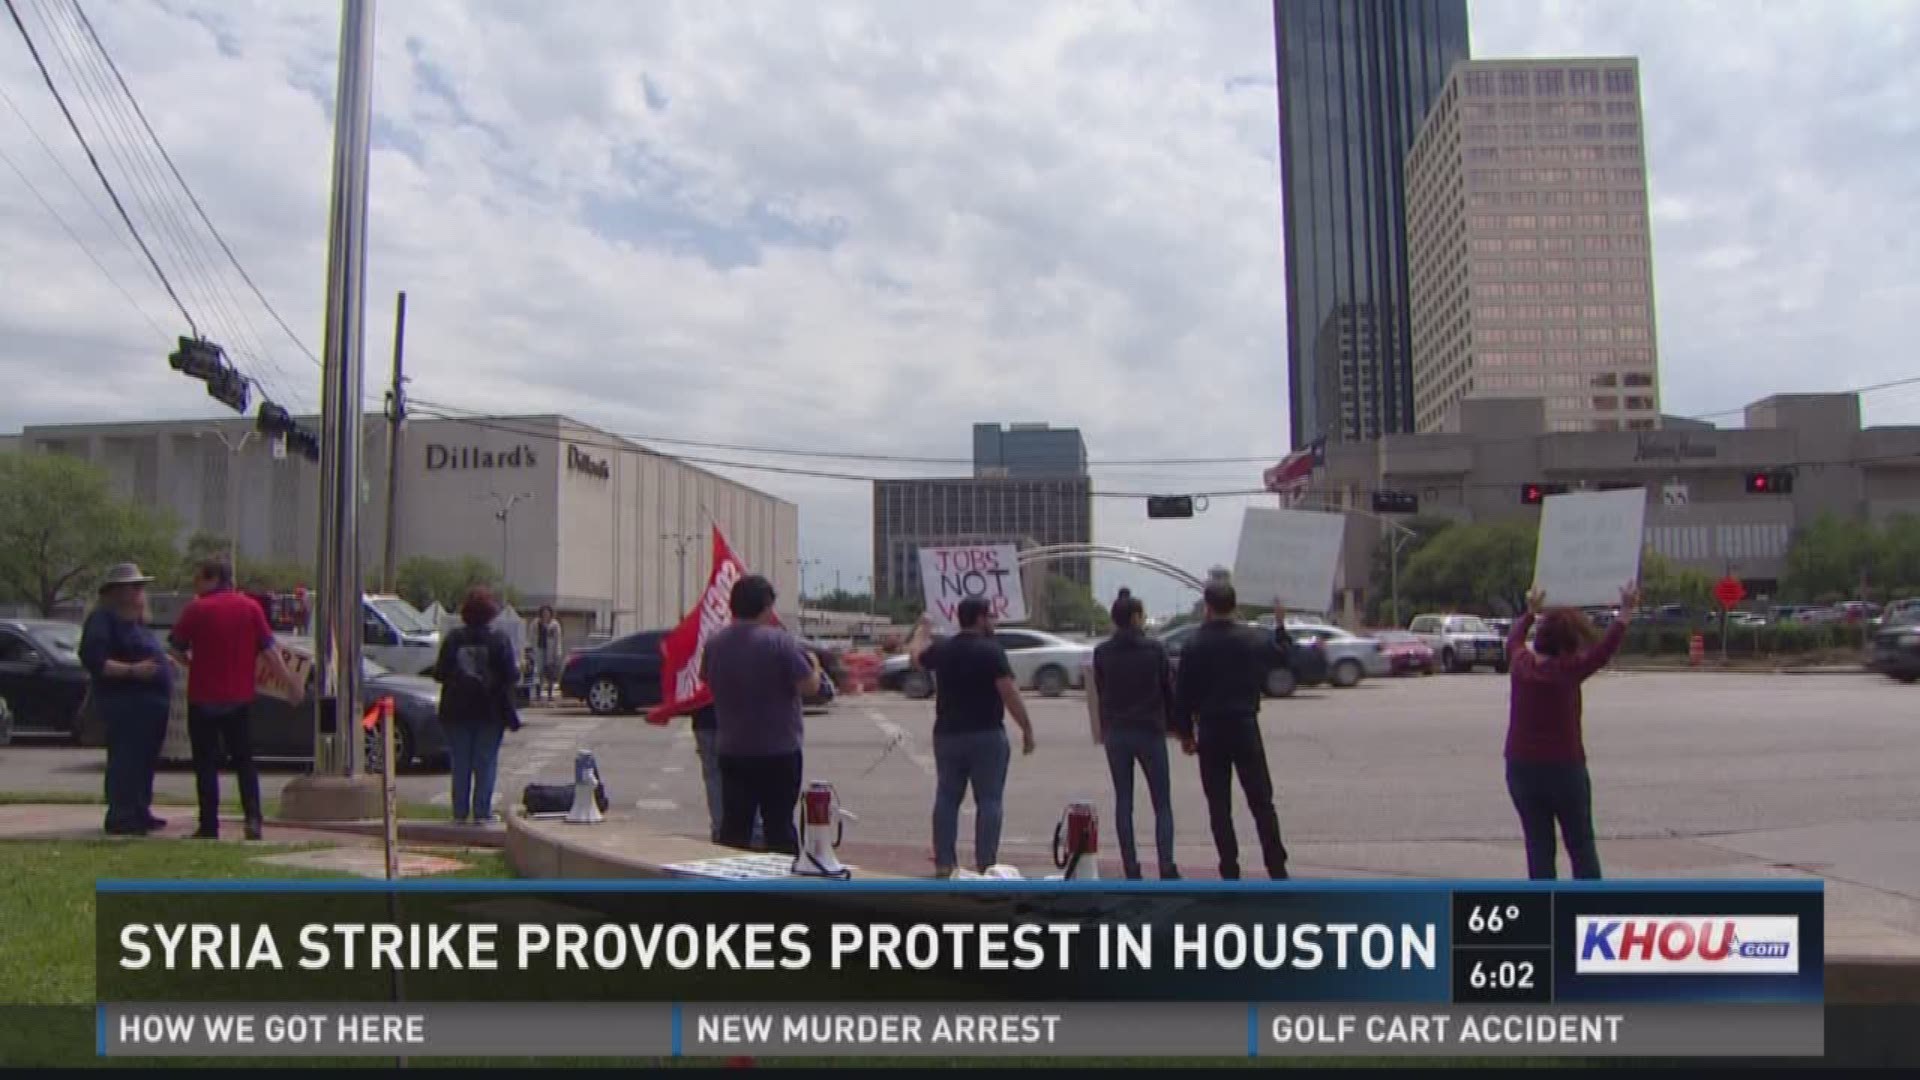 As soon as the Houston Socialist Movement heard the news about the overnight airstrikes in Syria, the movement held what it described as an emergency protest. 